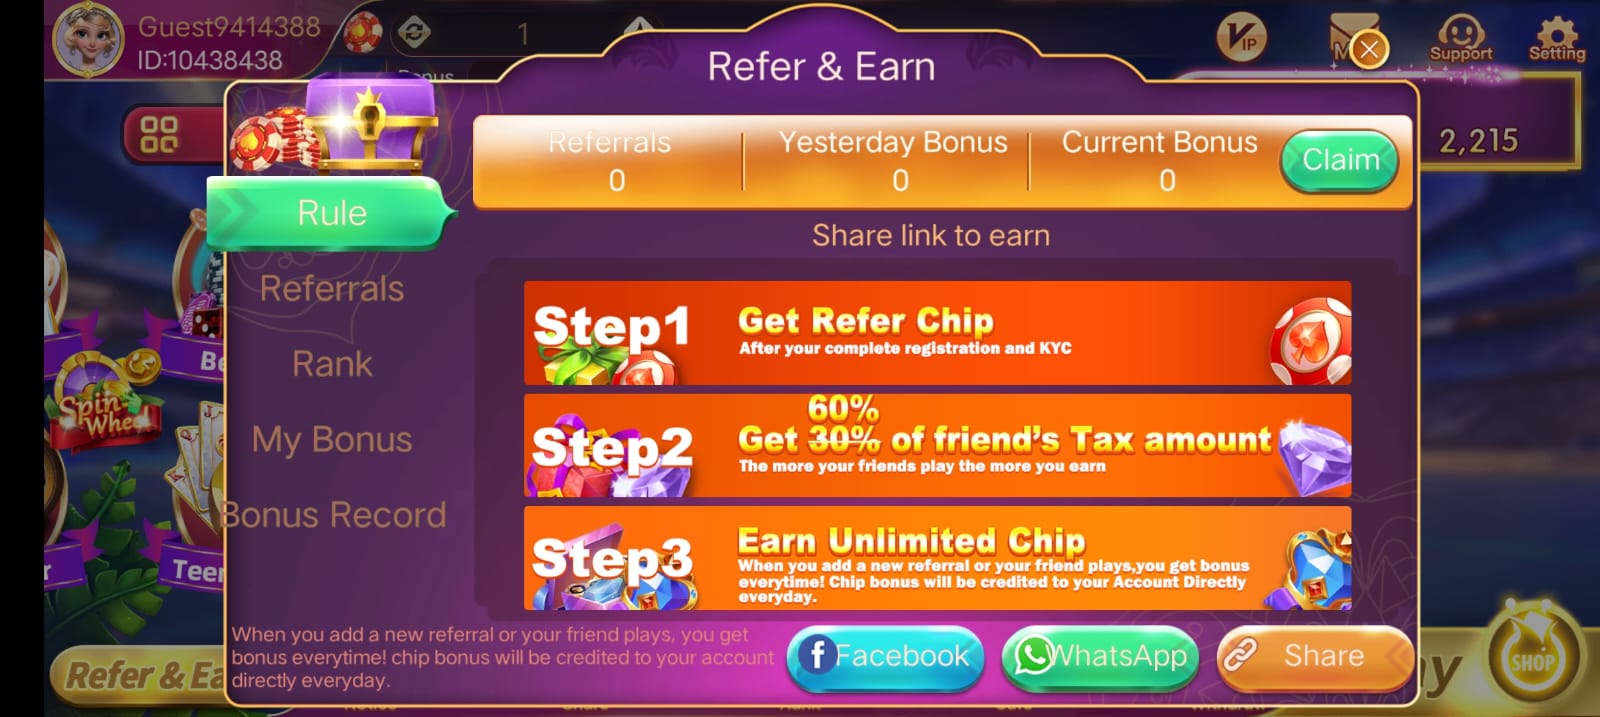 REFER AND EARN IN RUMMY GLEE APP